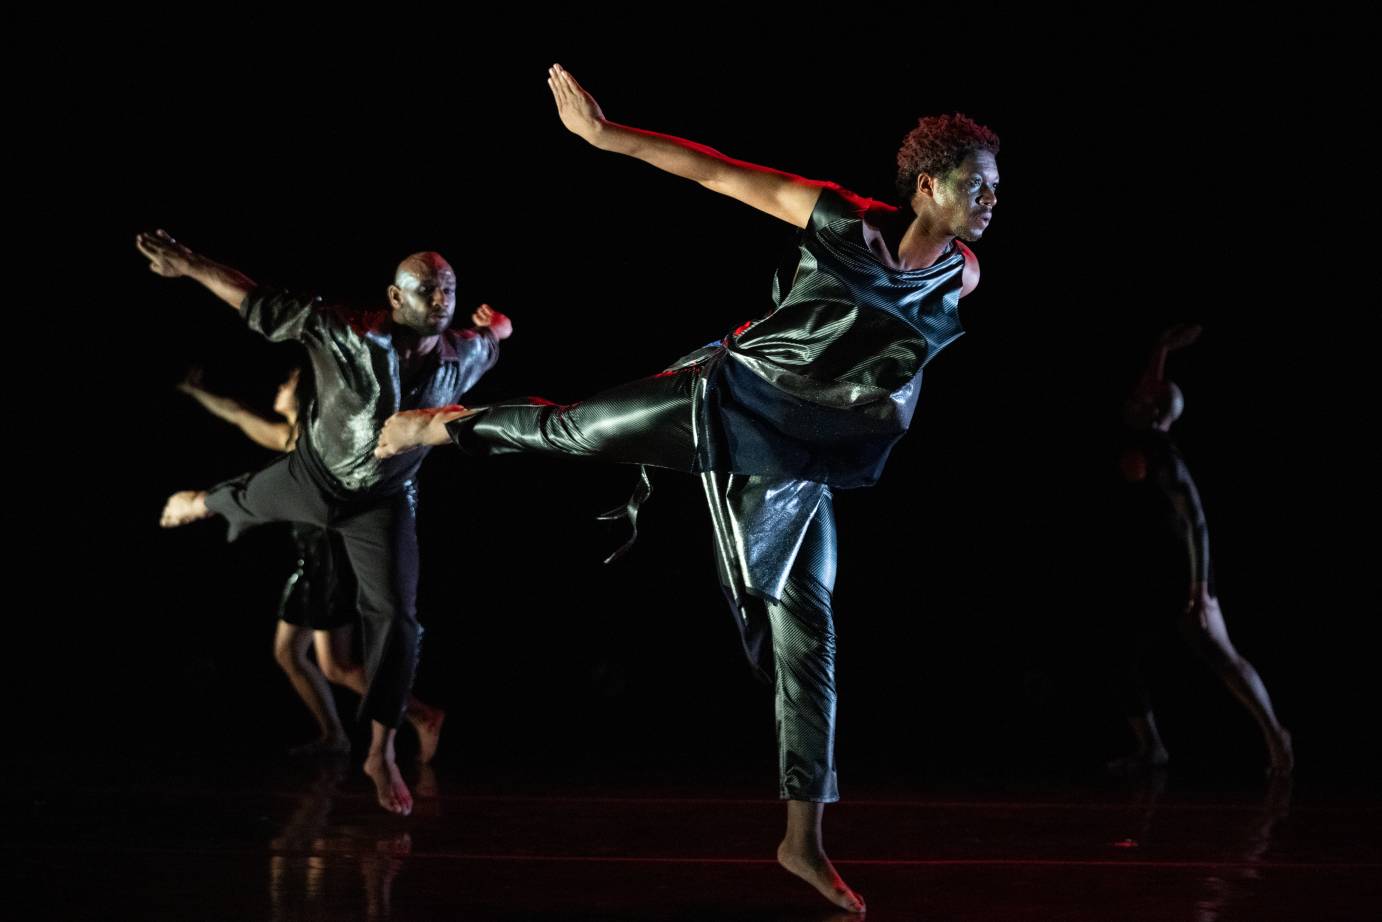 2 male dancers in a jump with one leg and arm extend behind them